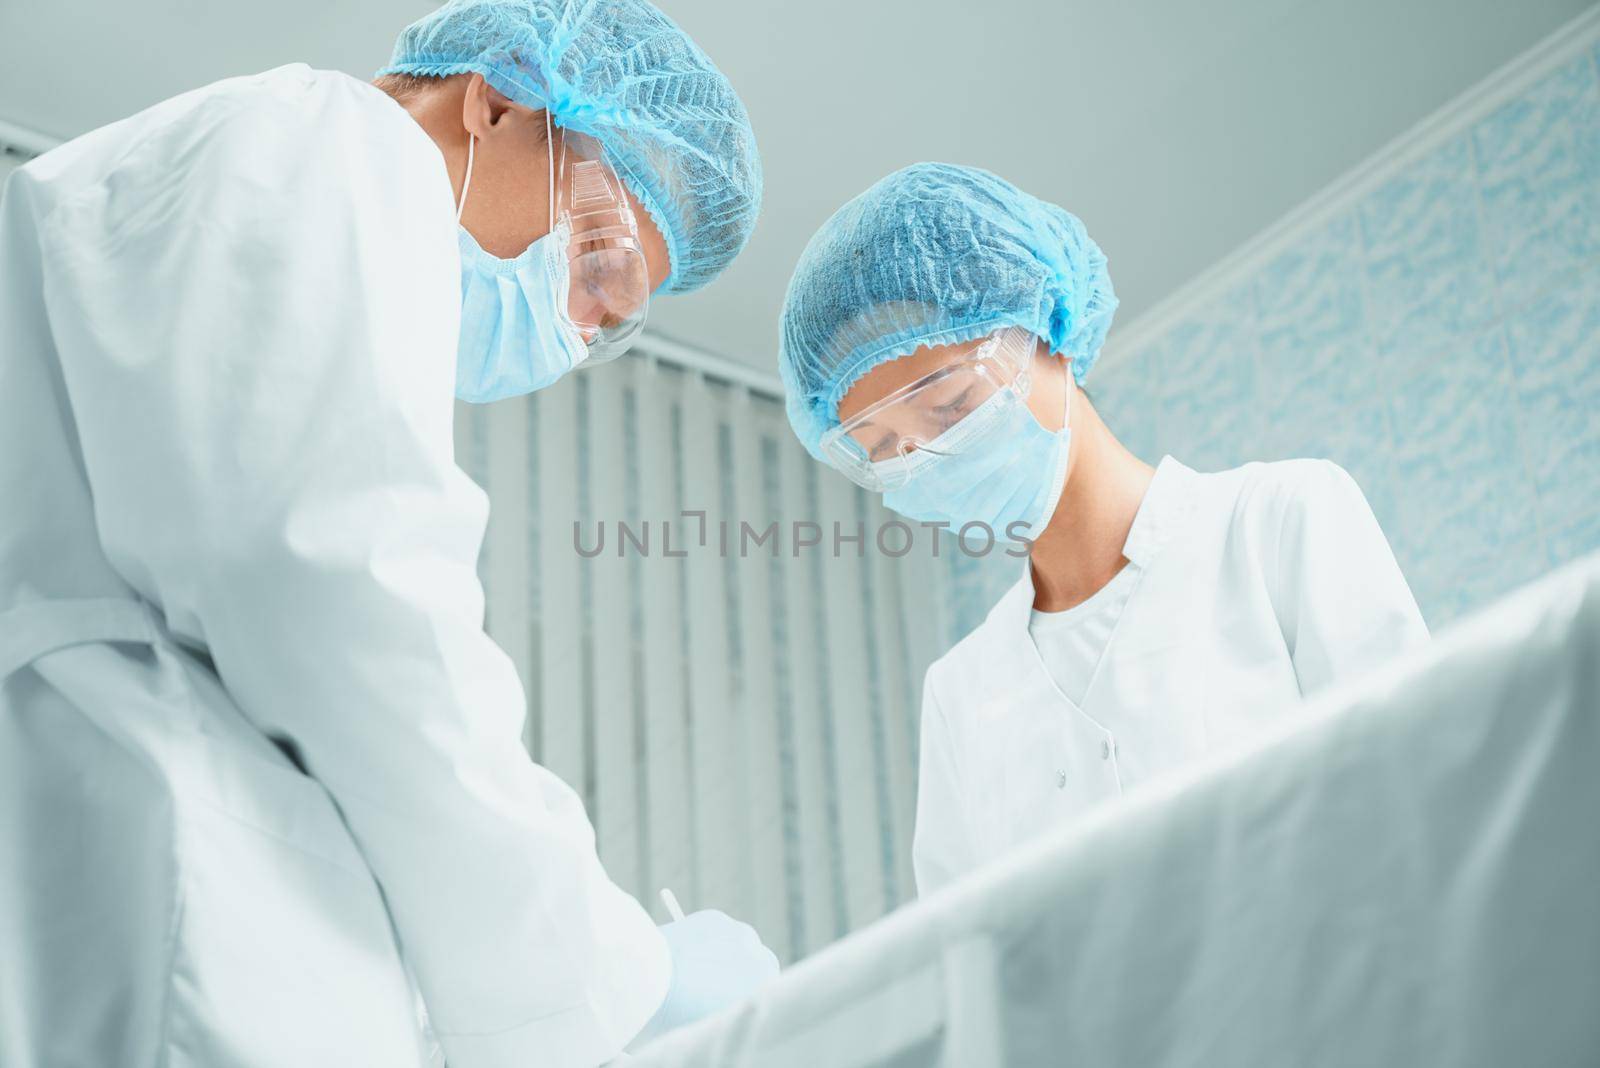 Two surgeons in operating room by alexAleksei